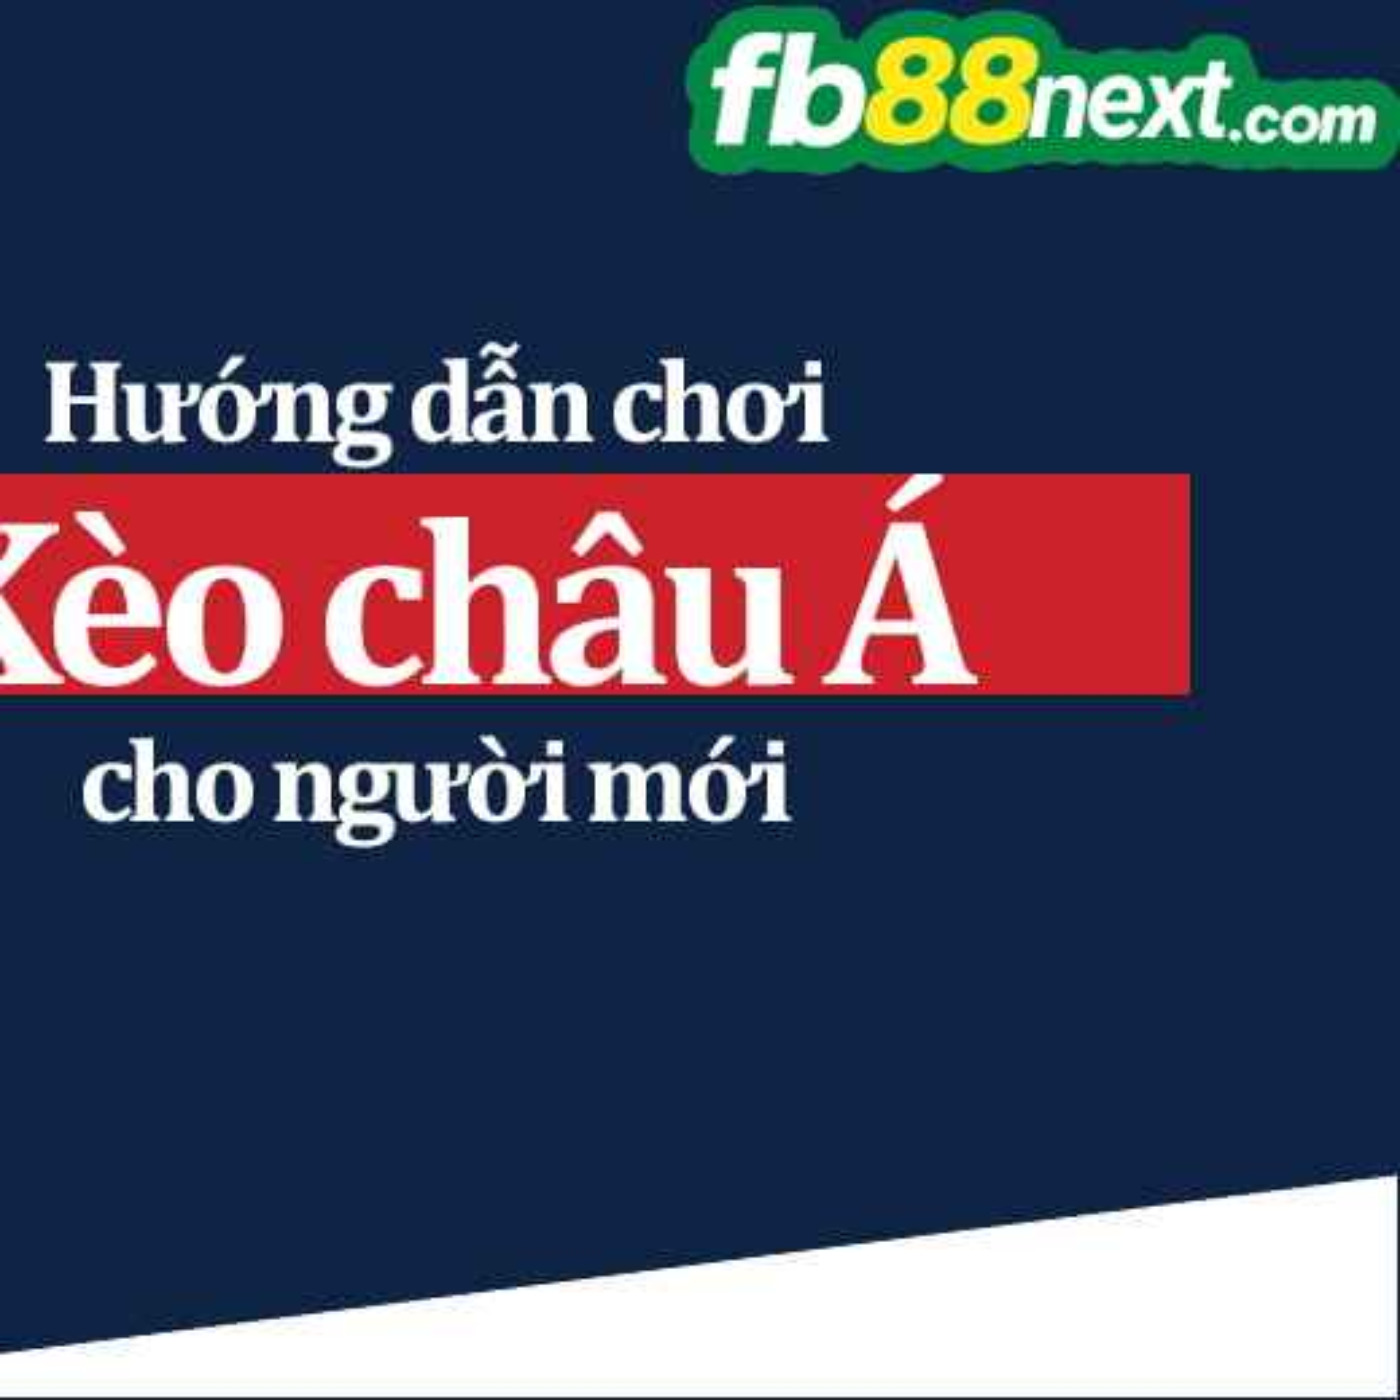 cover art for Keo chau A FB88 dat cuoc nhu the nao